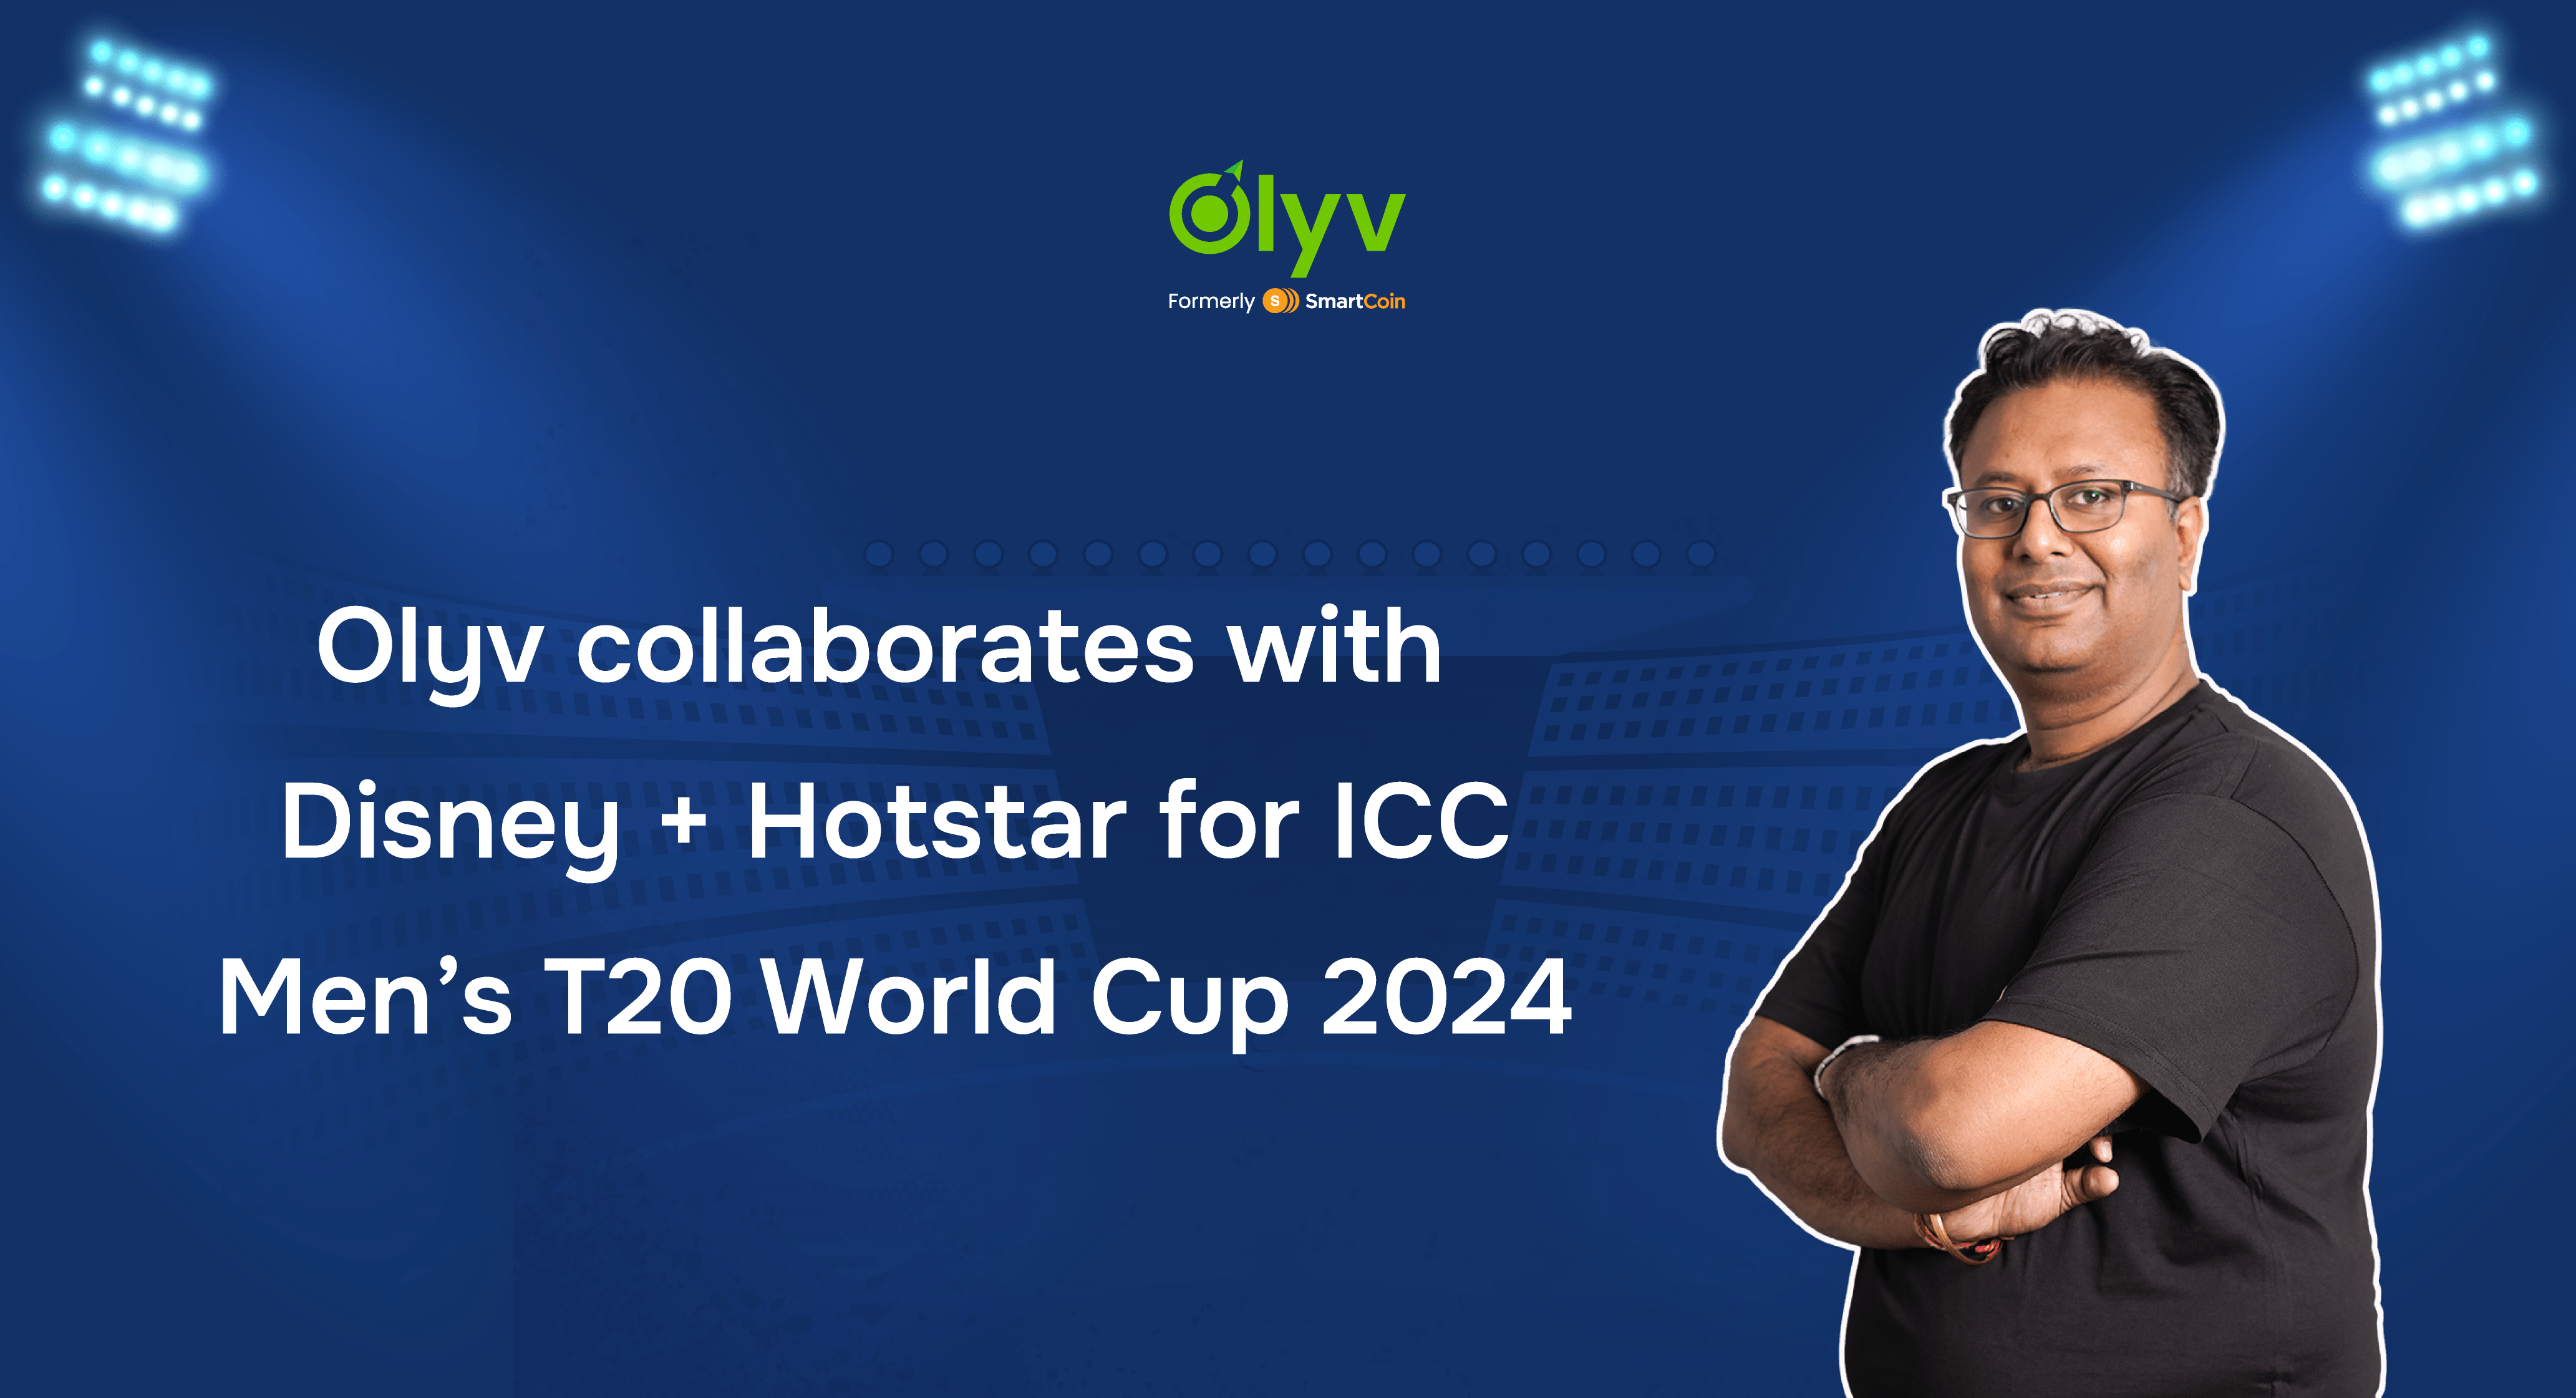 Olyv collaborates with Disney+ Hotstar to showcase its new identity & offerings during the ICC Men’s T20 World Cup 2024.